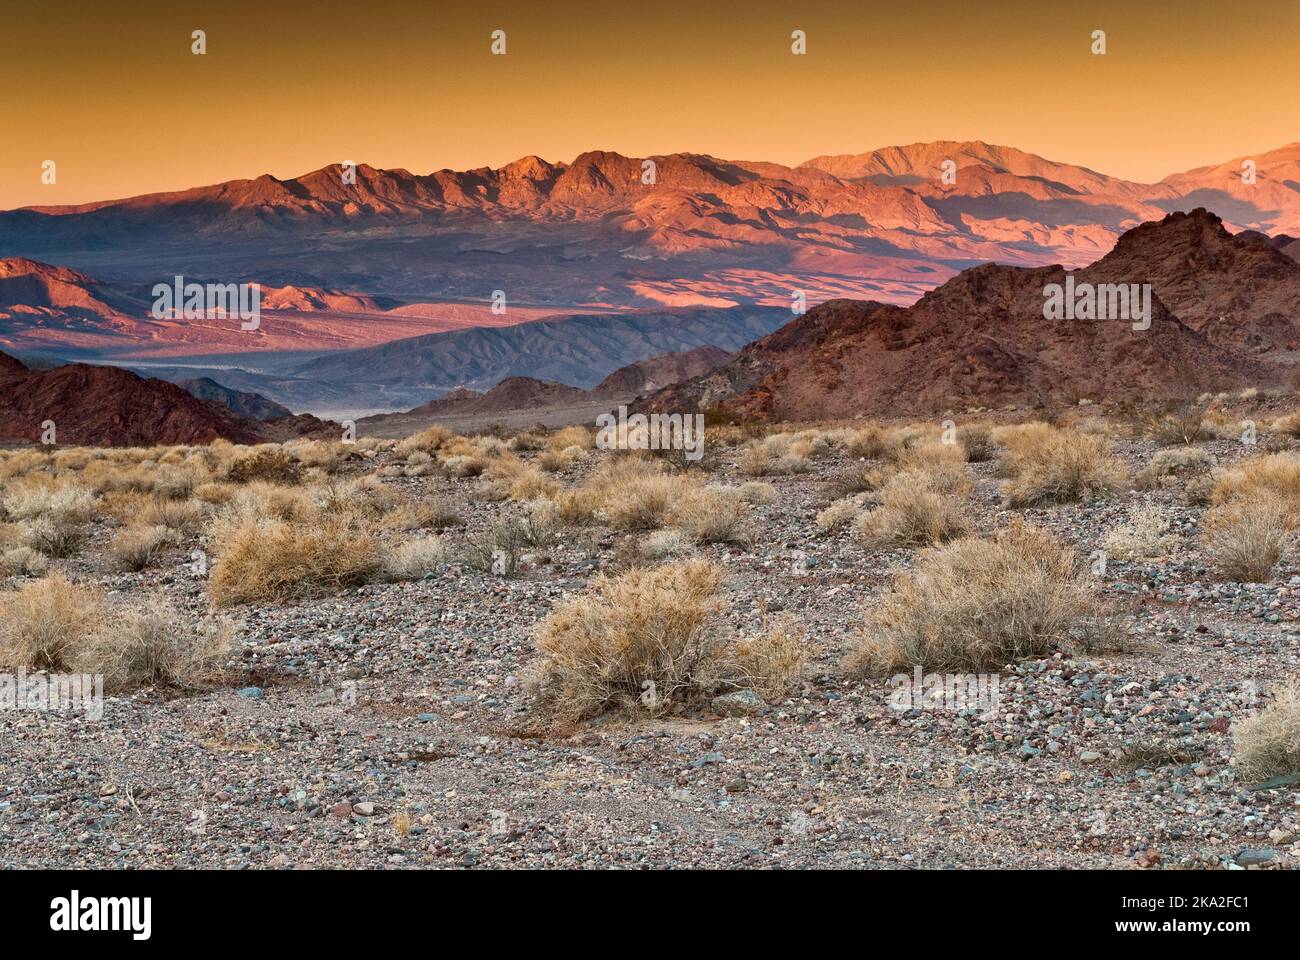 Mojave Desert and distant Sugarloaf Peak in Panamint Range  seen at sunrise from Jubilee Pass area in Death Valley National Park, California, USA Stock Photo